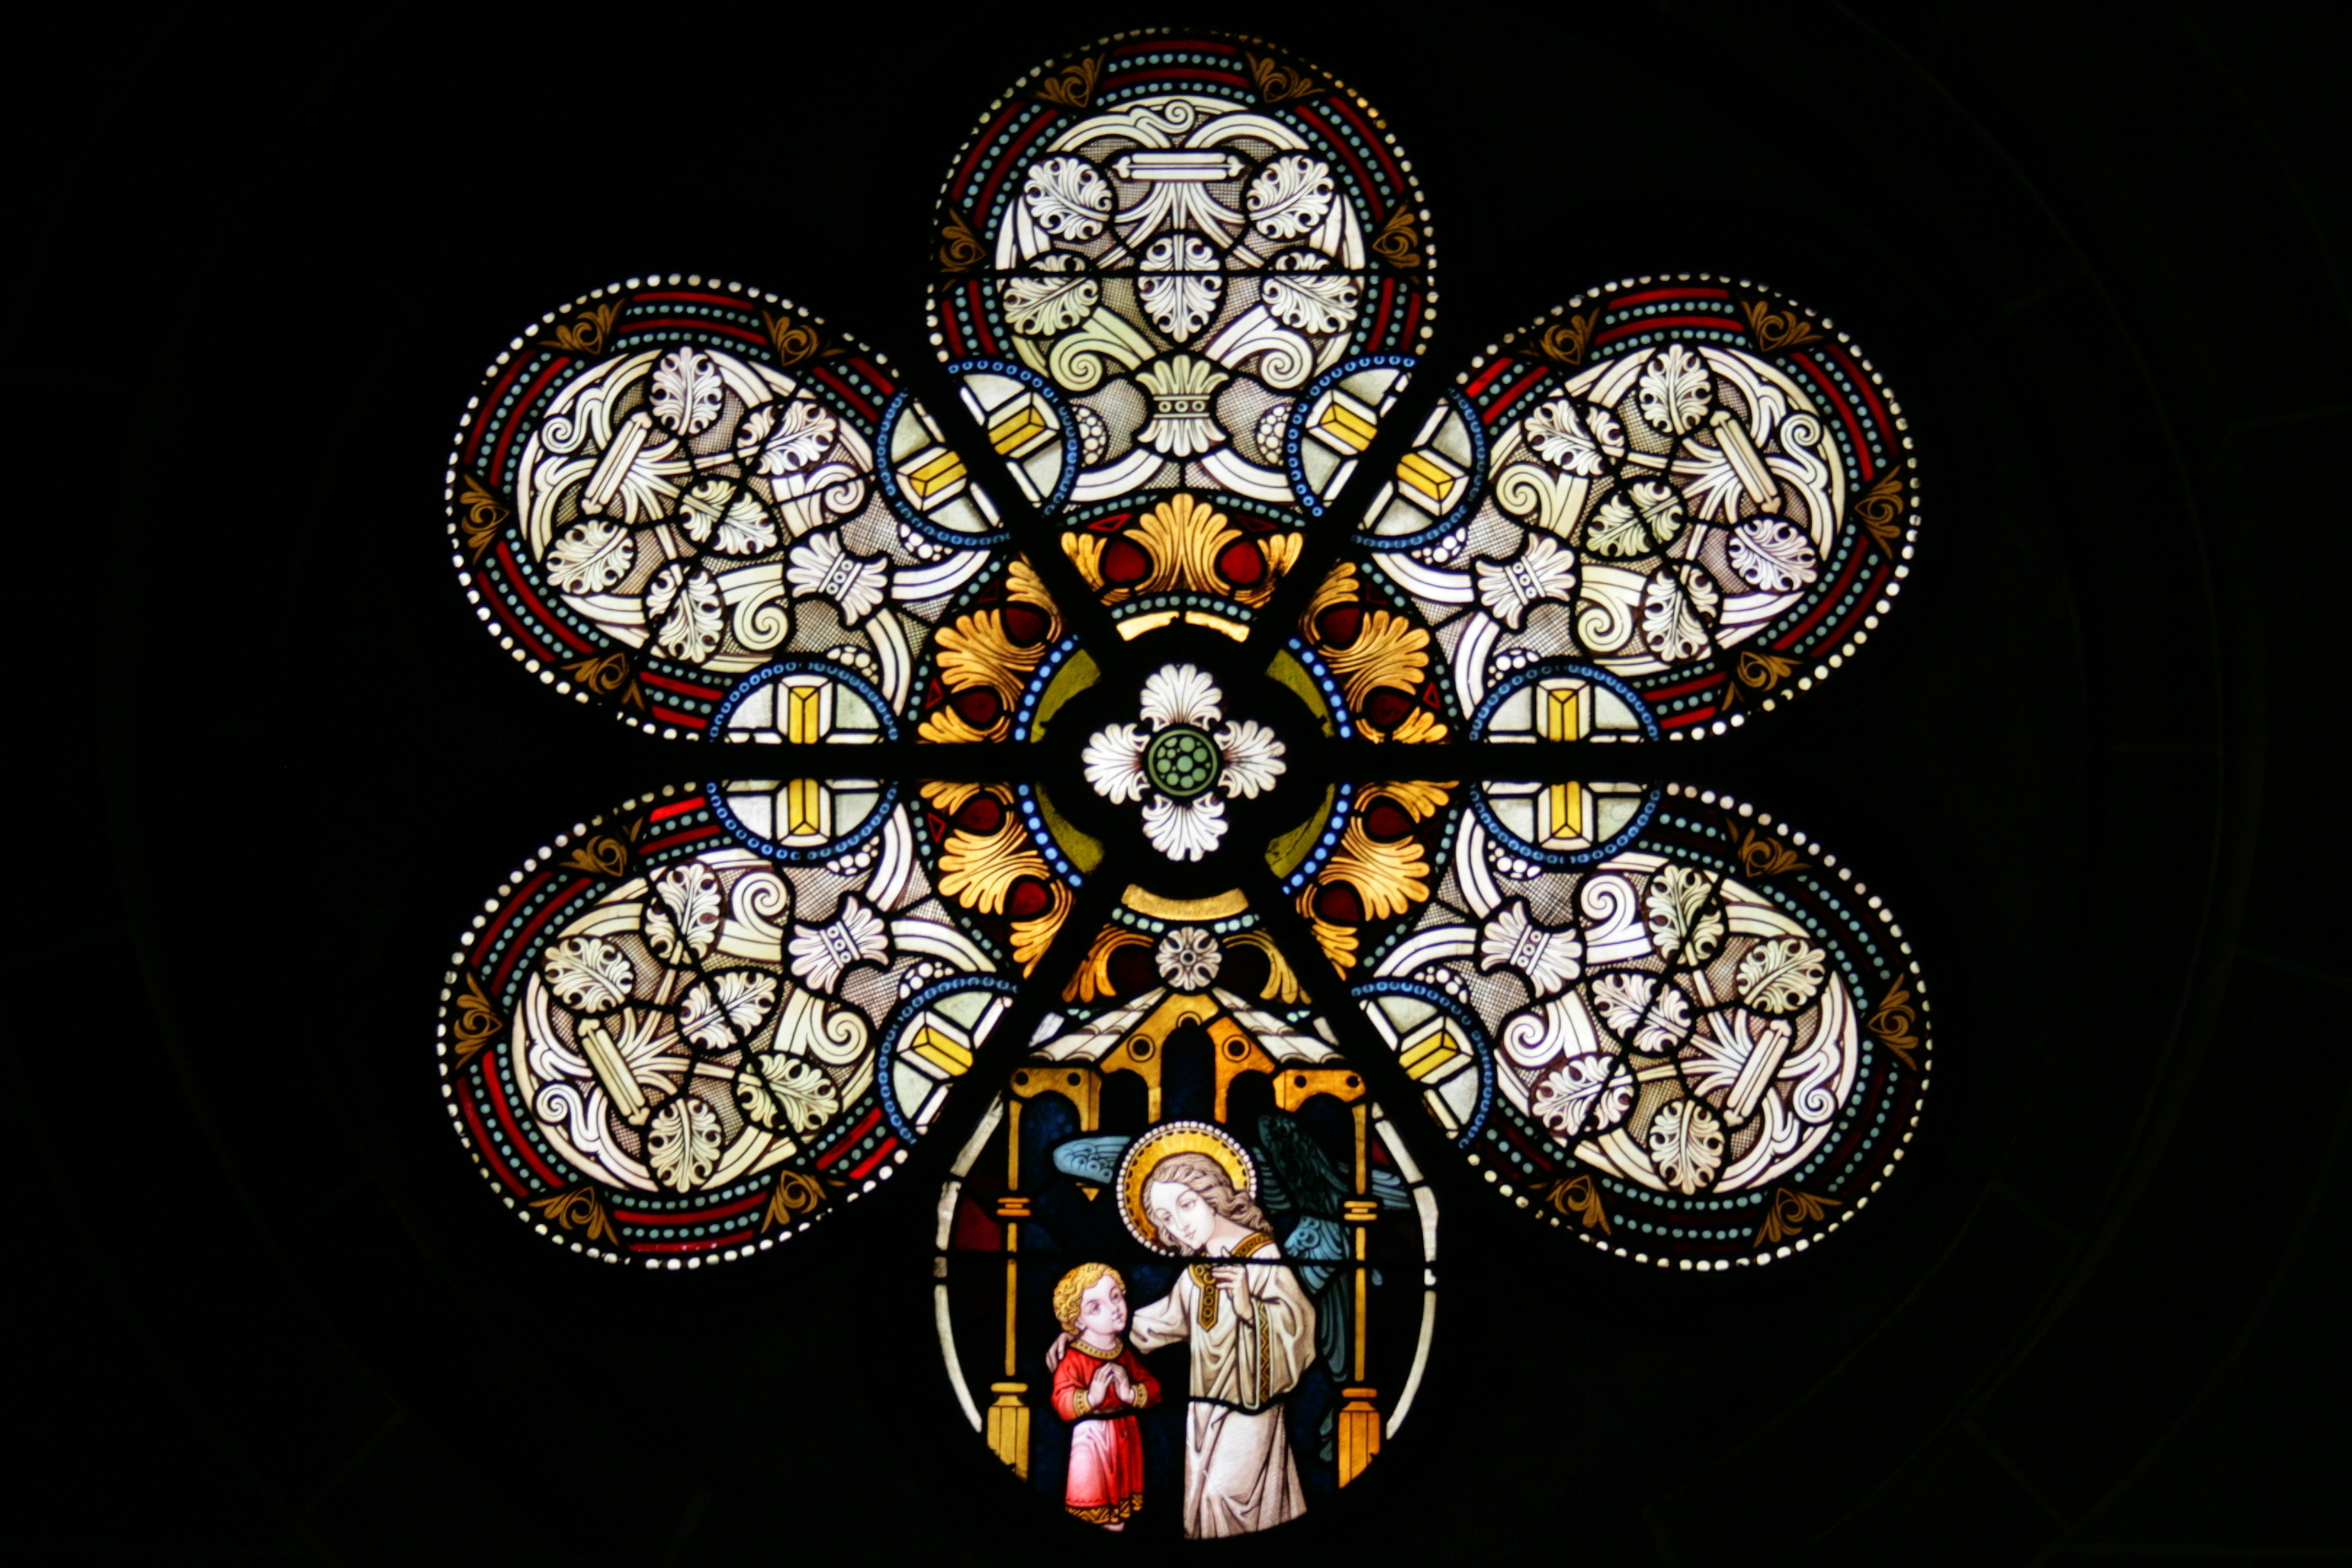 Stained glass window showing guardian angel in St. Laurence church